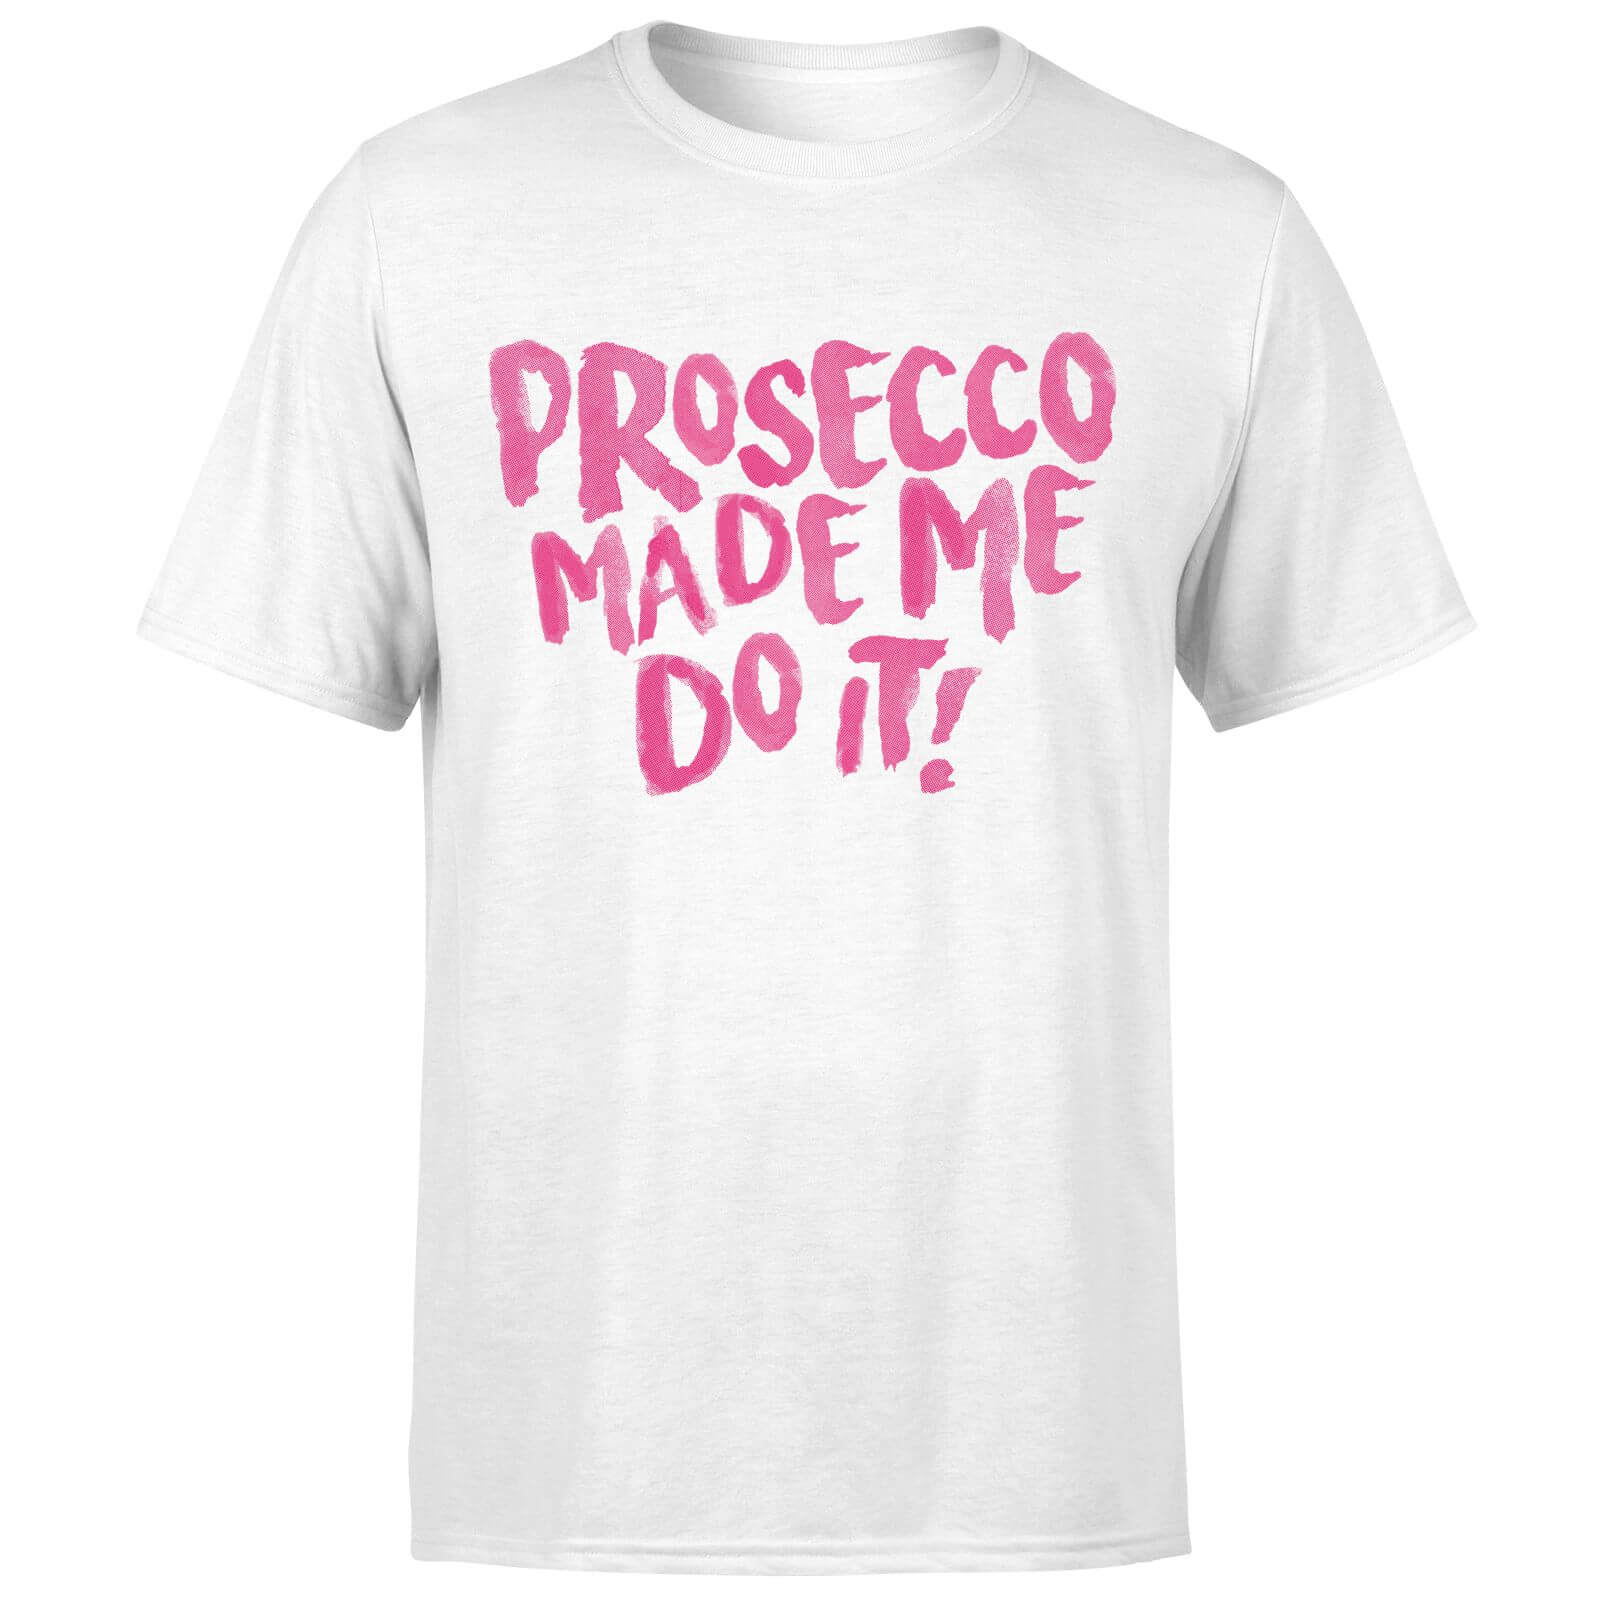 Prosecco Made Me Do it T-Shirt - White - S - White